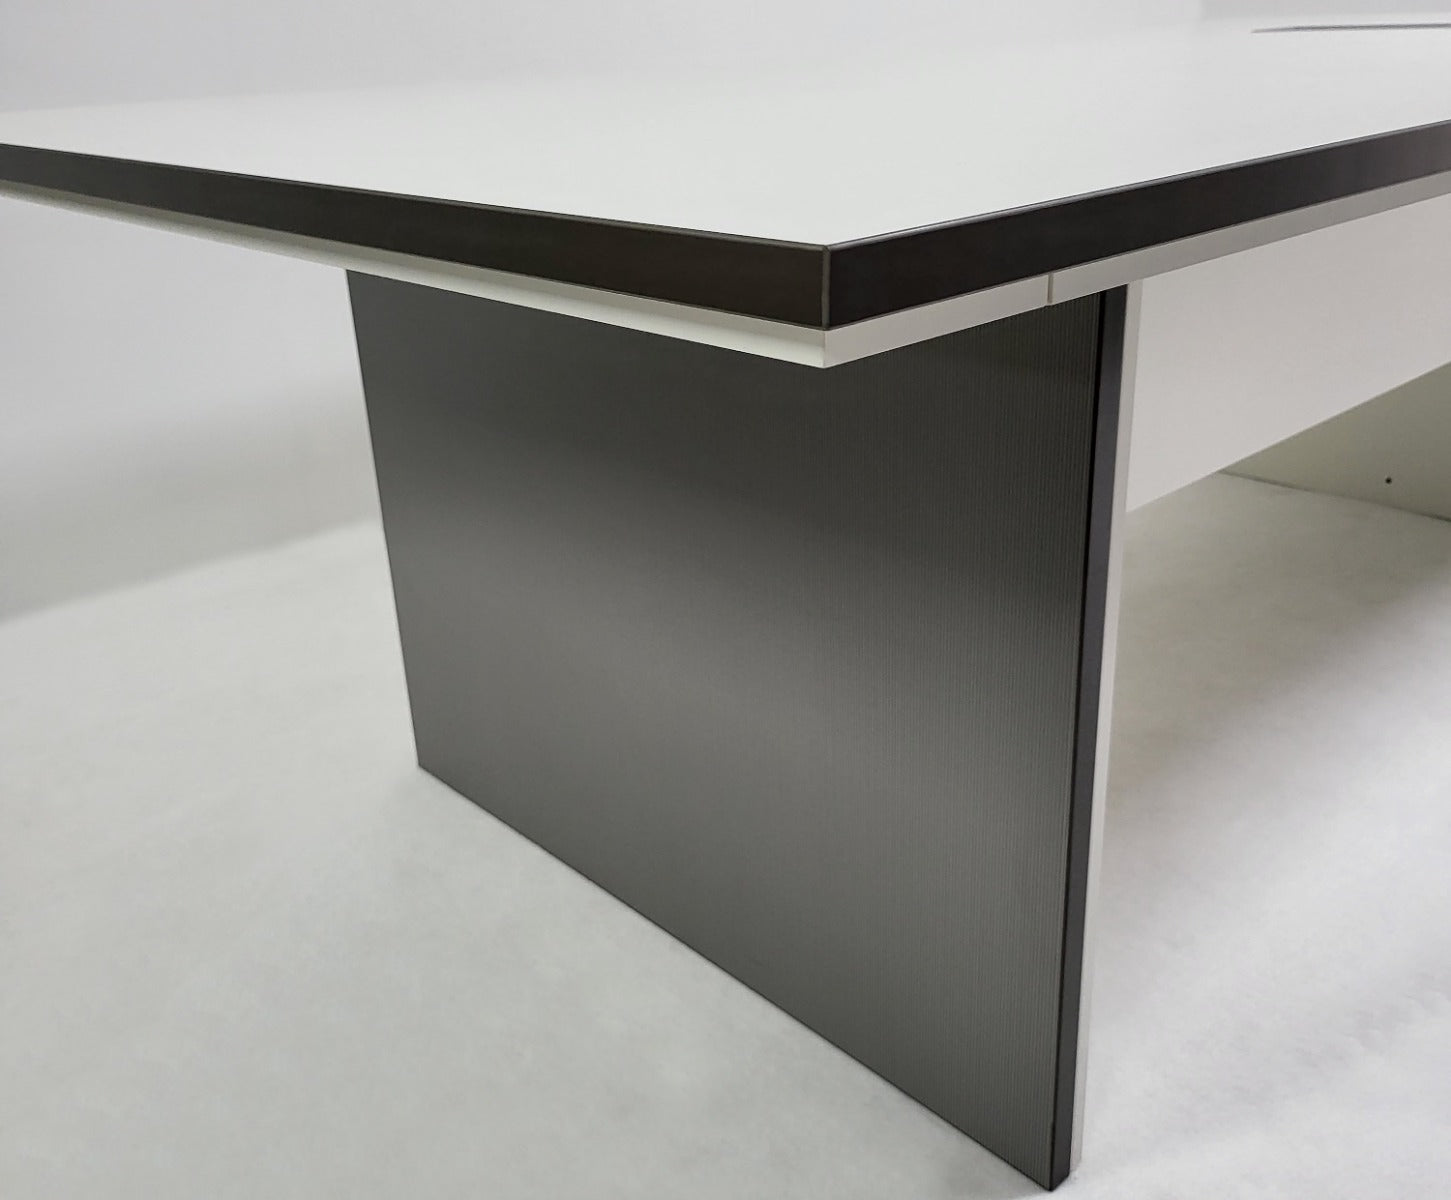 Heavy Duty 2400mm White and Grey Stripe Executive Boardroom Table - C0124